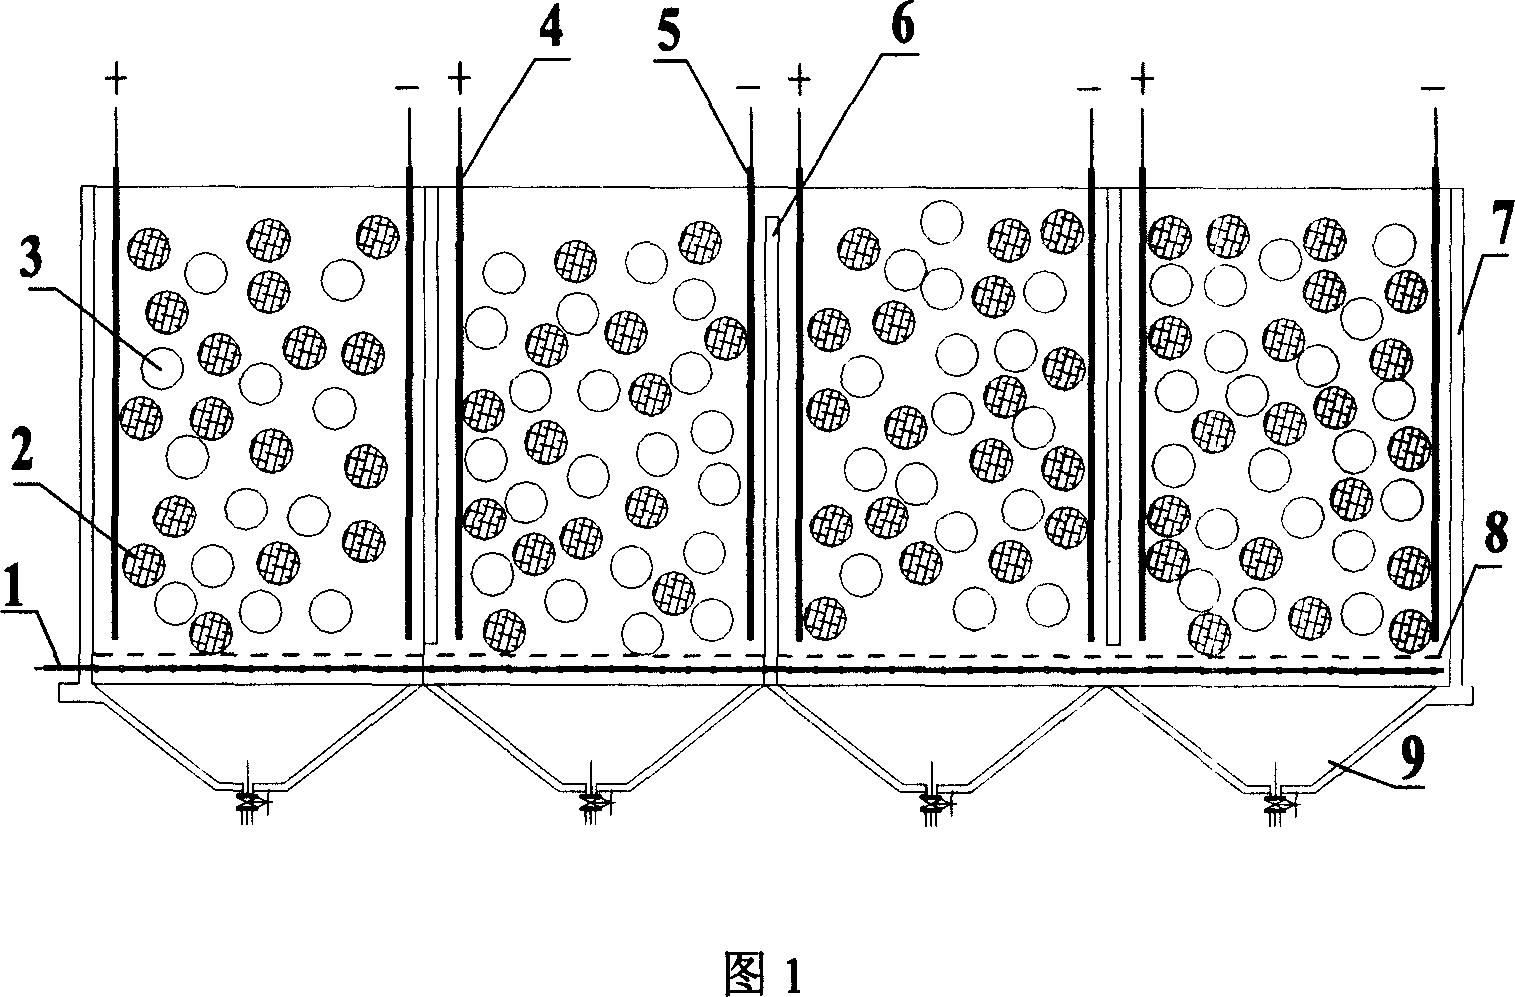 Composite electrolytic bath and method for electrolyzing and decoloring pulp-making effluent